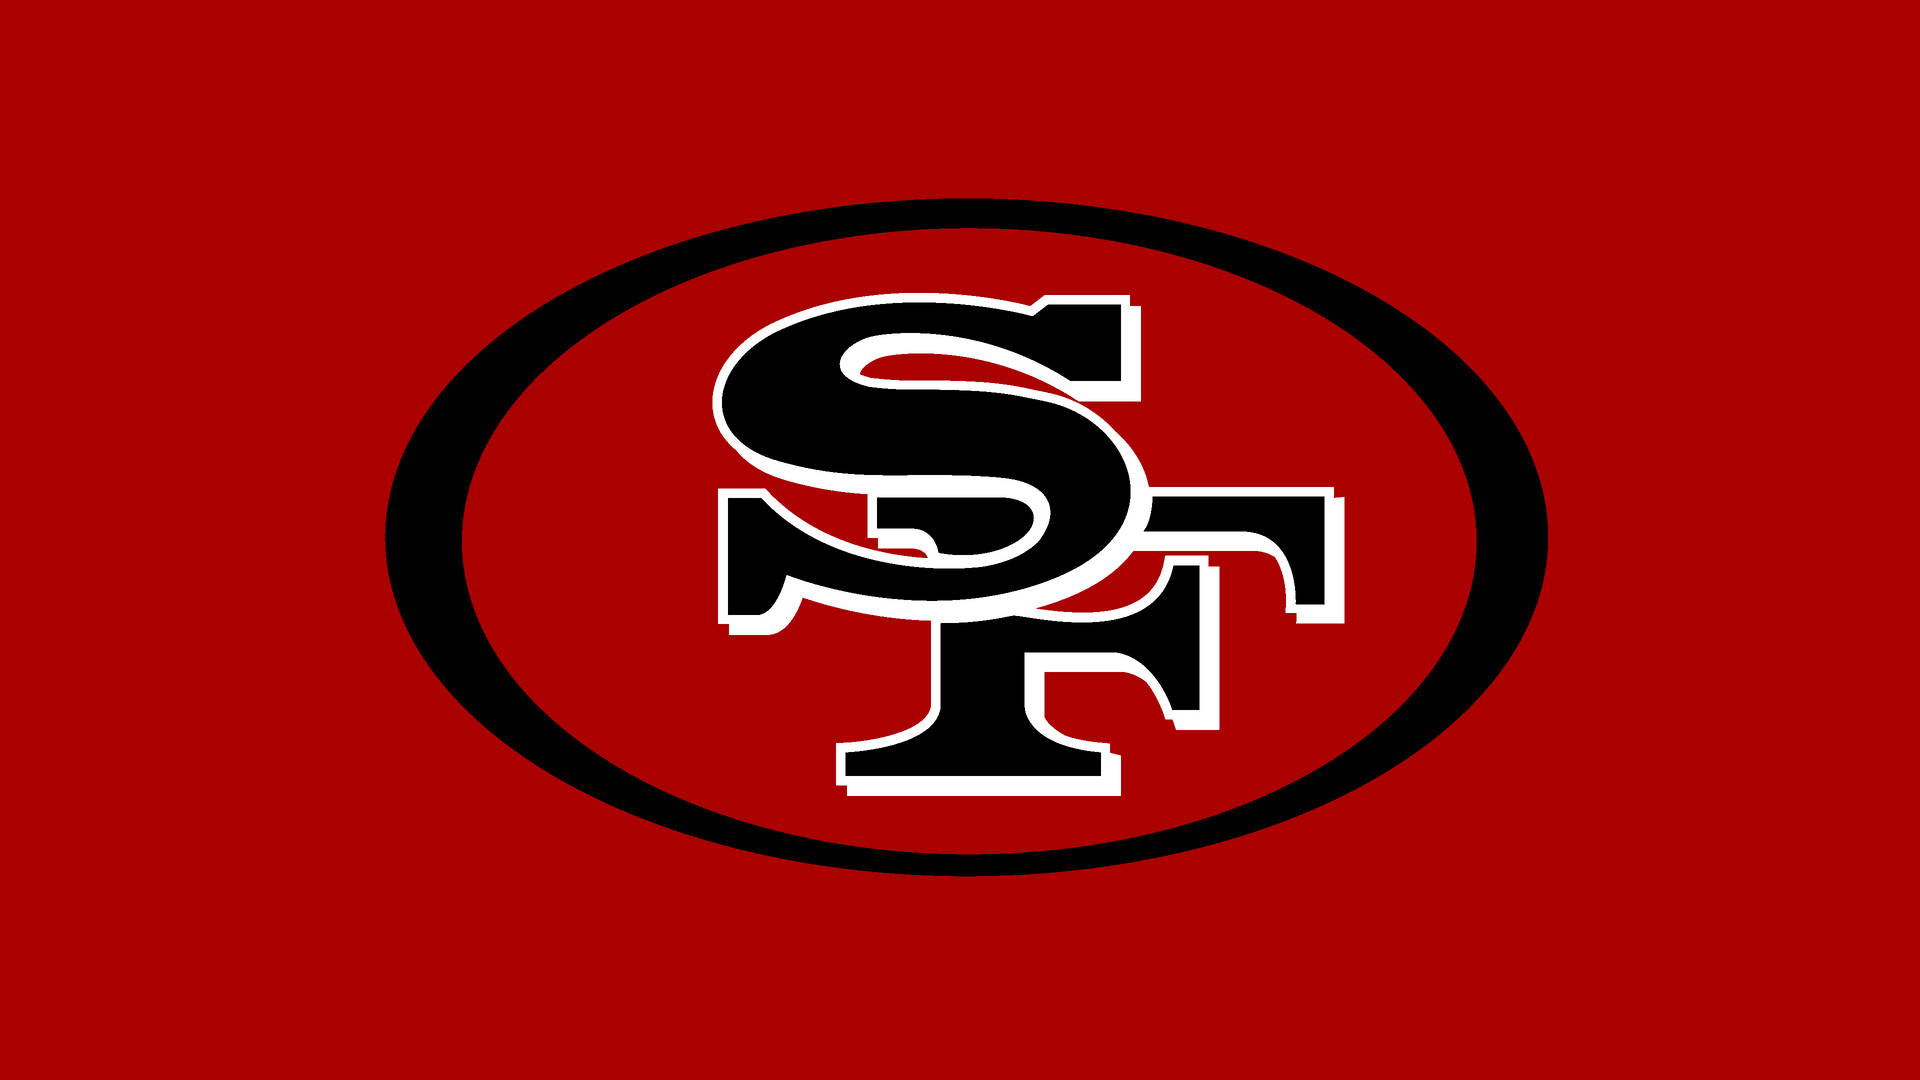 The Official Logo of the San Francisco 49ers Wallpaper